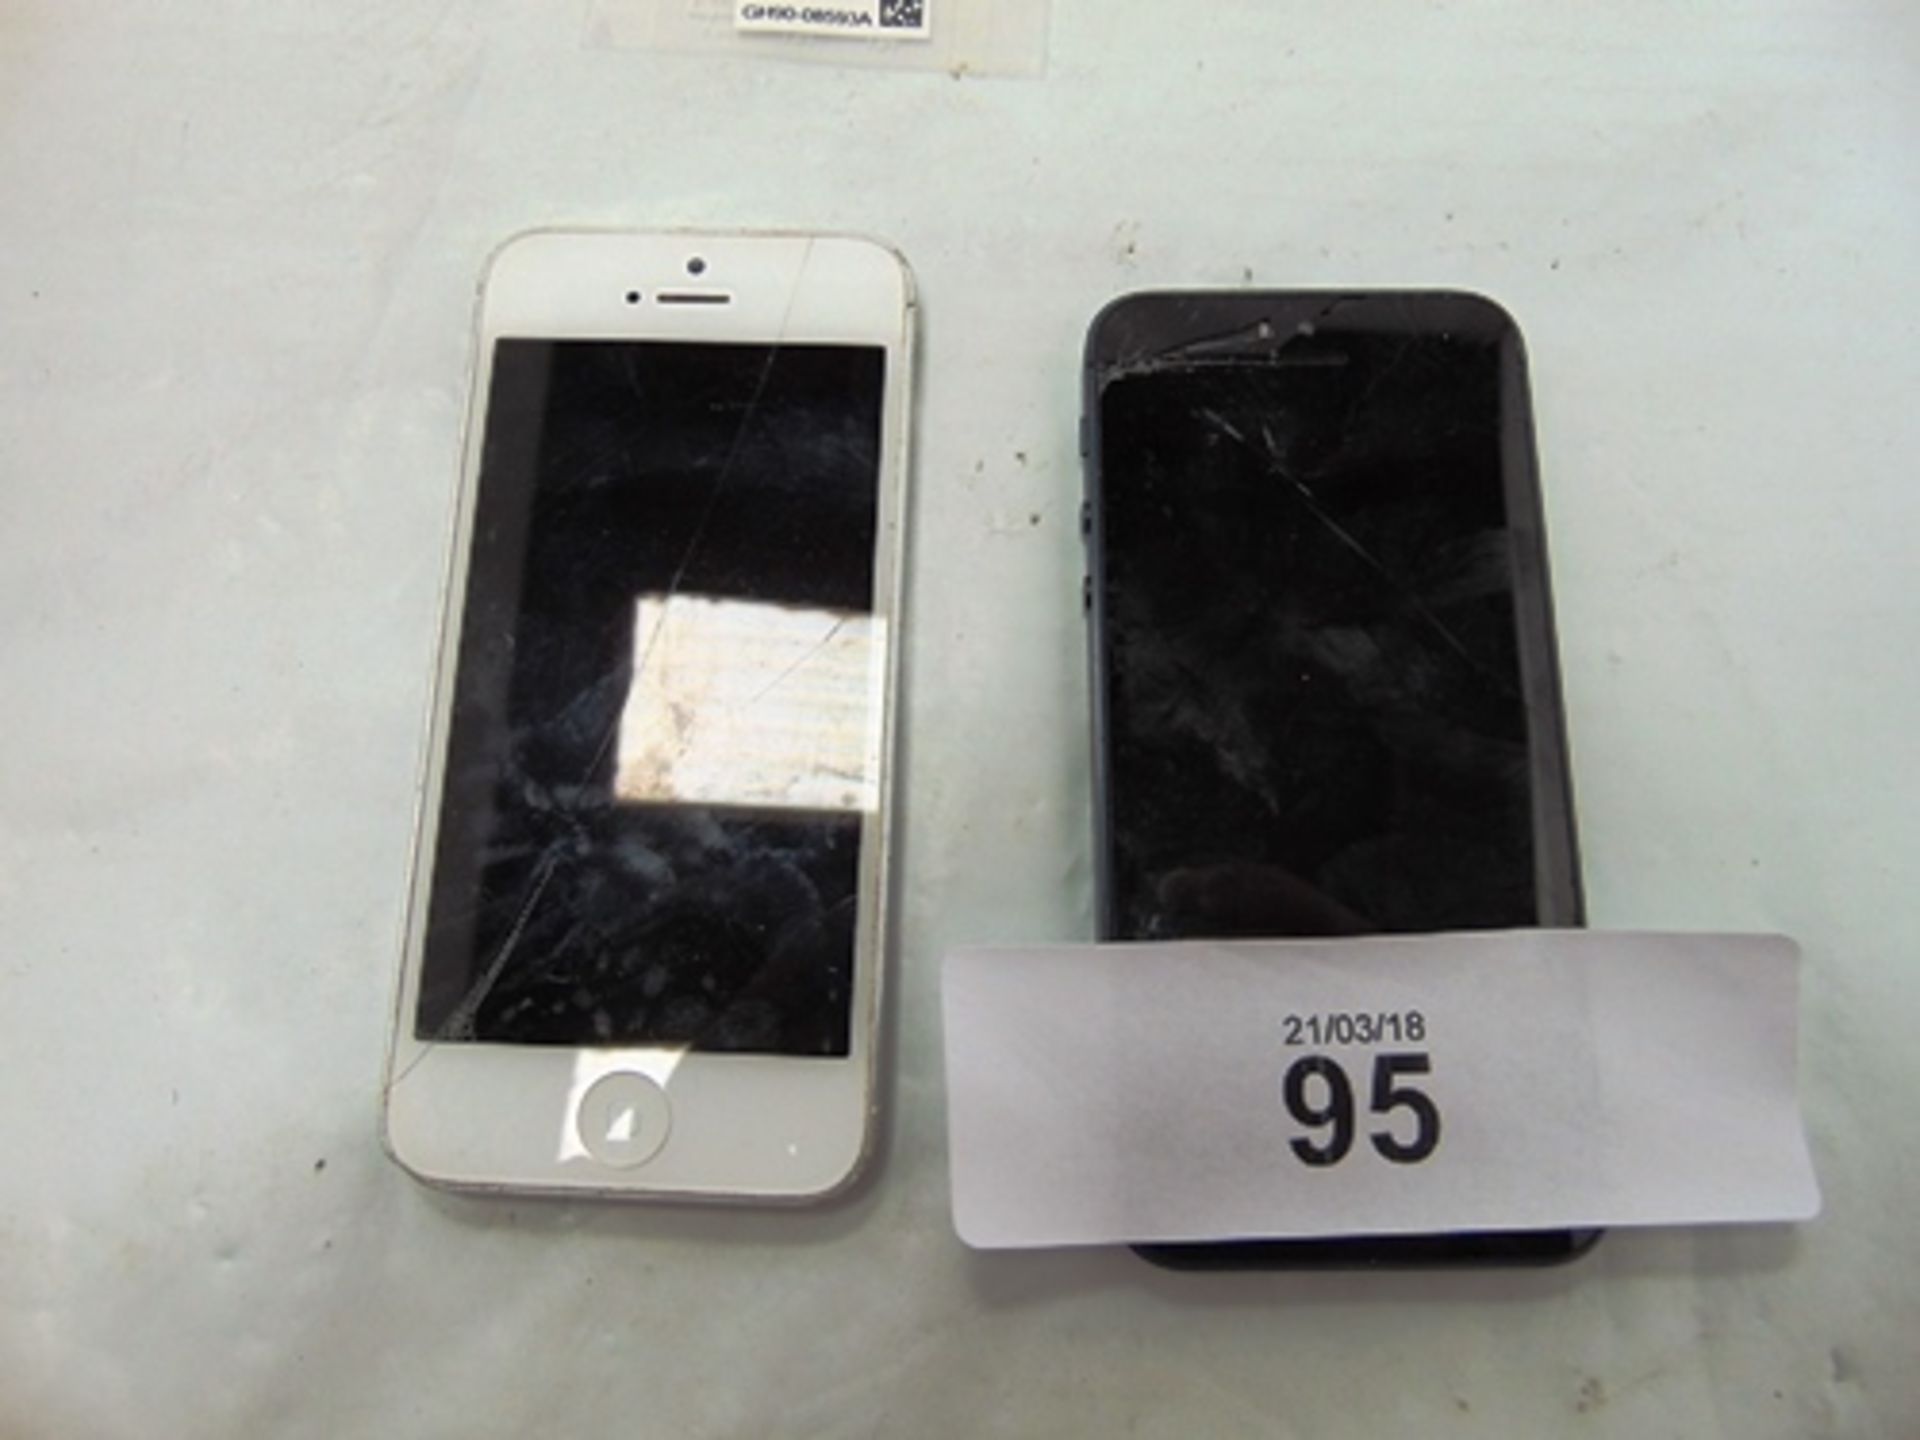 1 x navy and 1 x white Apple iPhone 5's, with damaged screens and back glass, both power on, factory